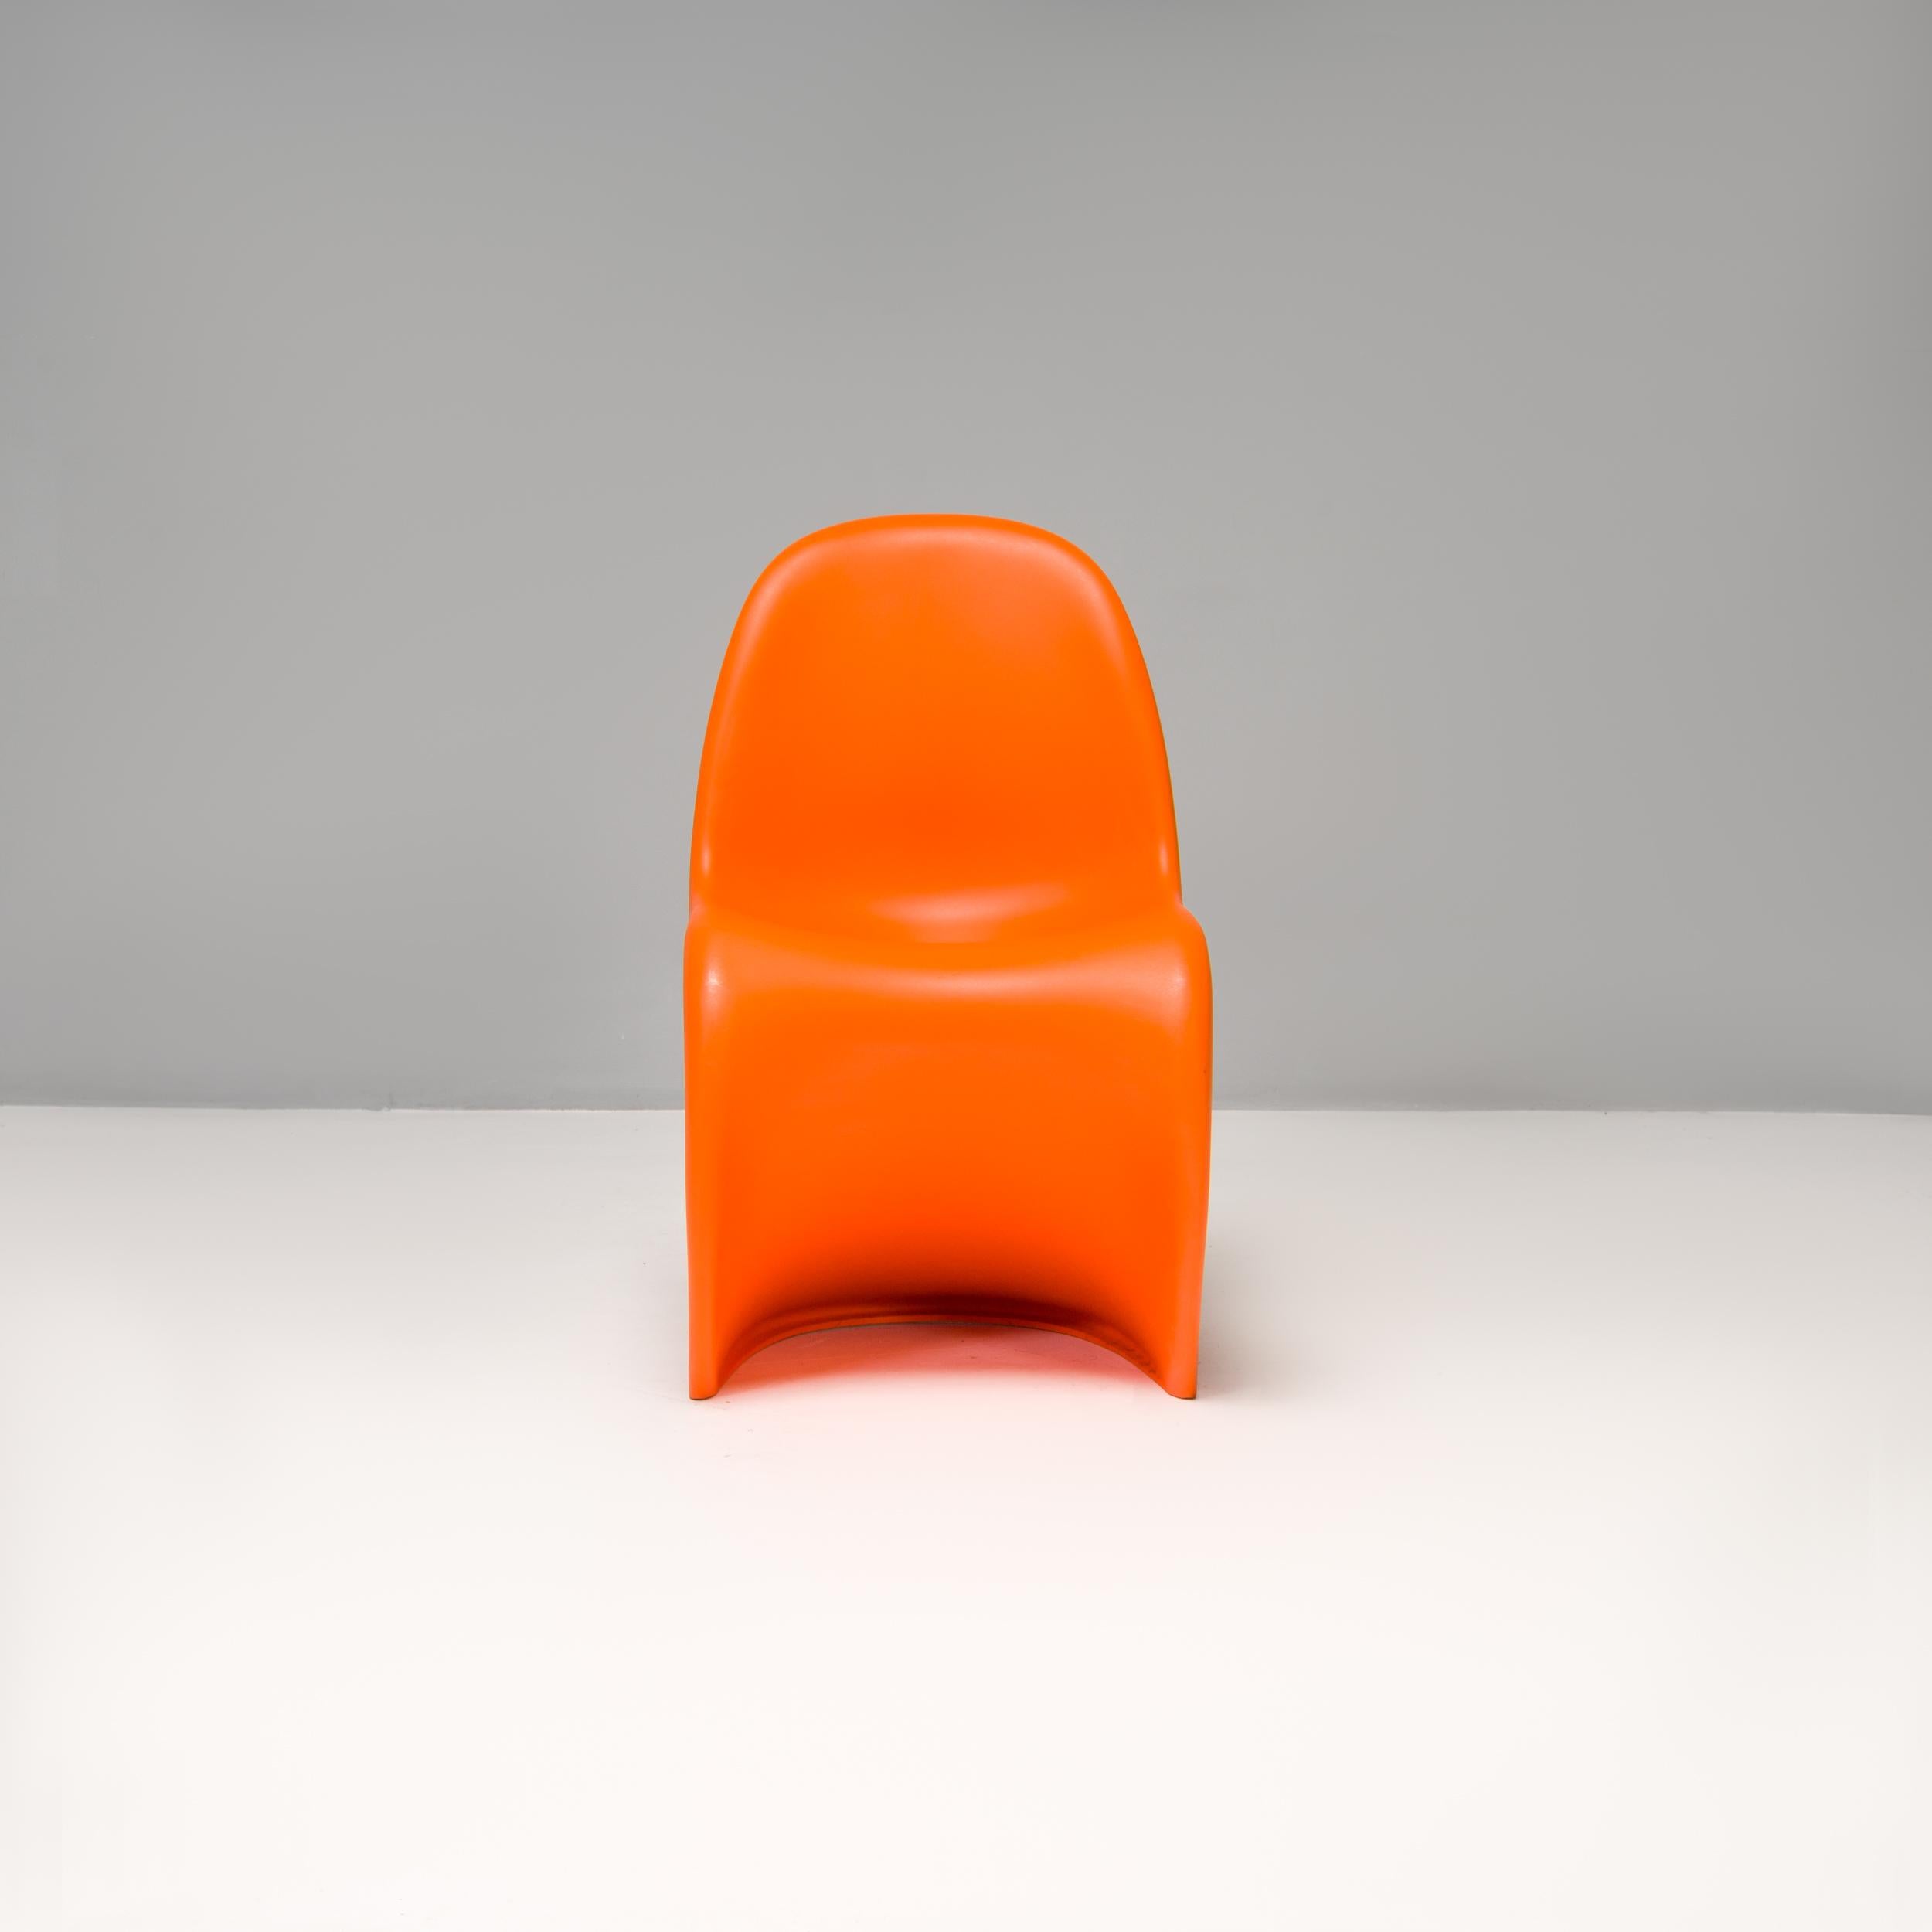 The Panton chair was designed by Verner Panton in 1960 and developed for production with Vitra in 1967, making history as the first chair to be manufactured in a single piece from plastic.

The most recent iteration was created in 1999 and the